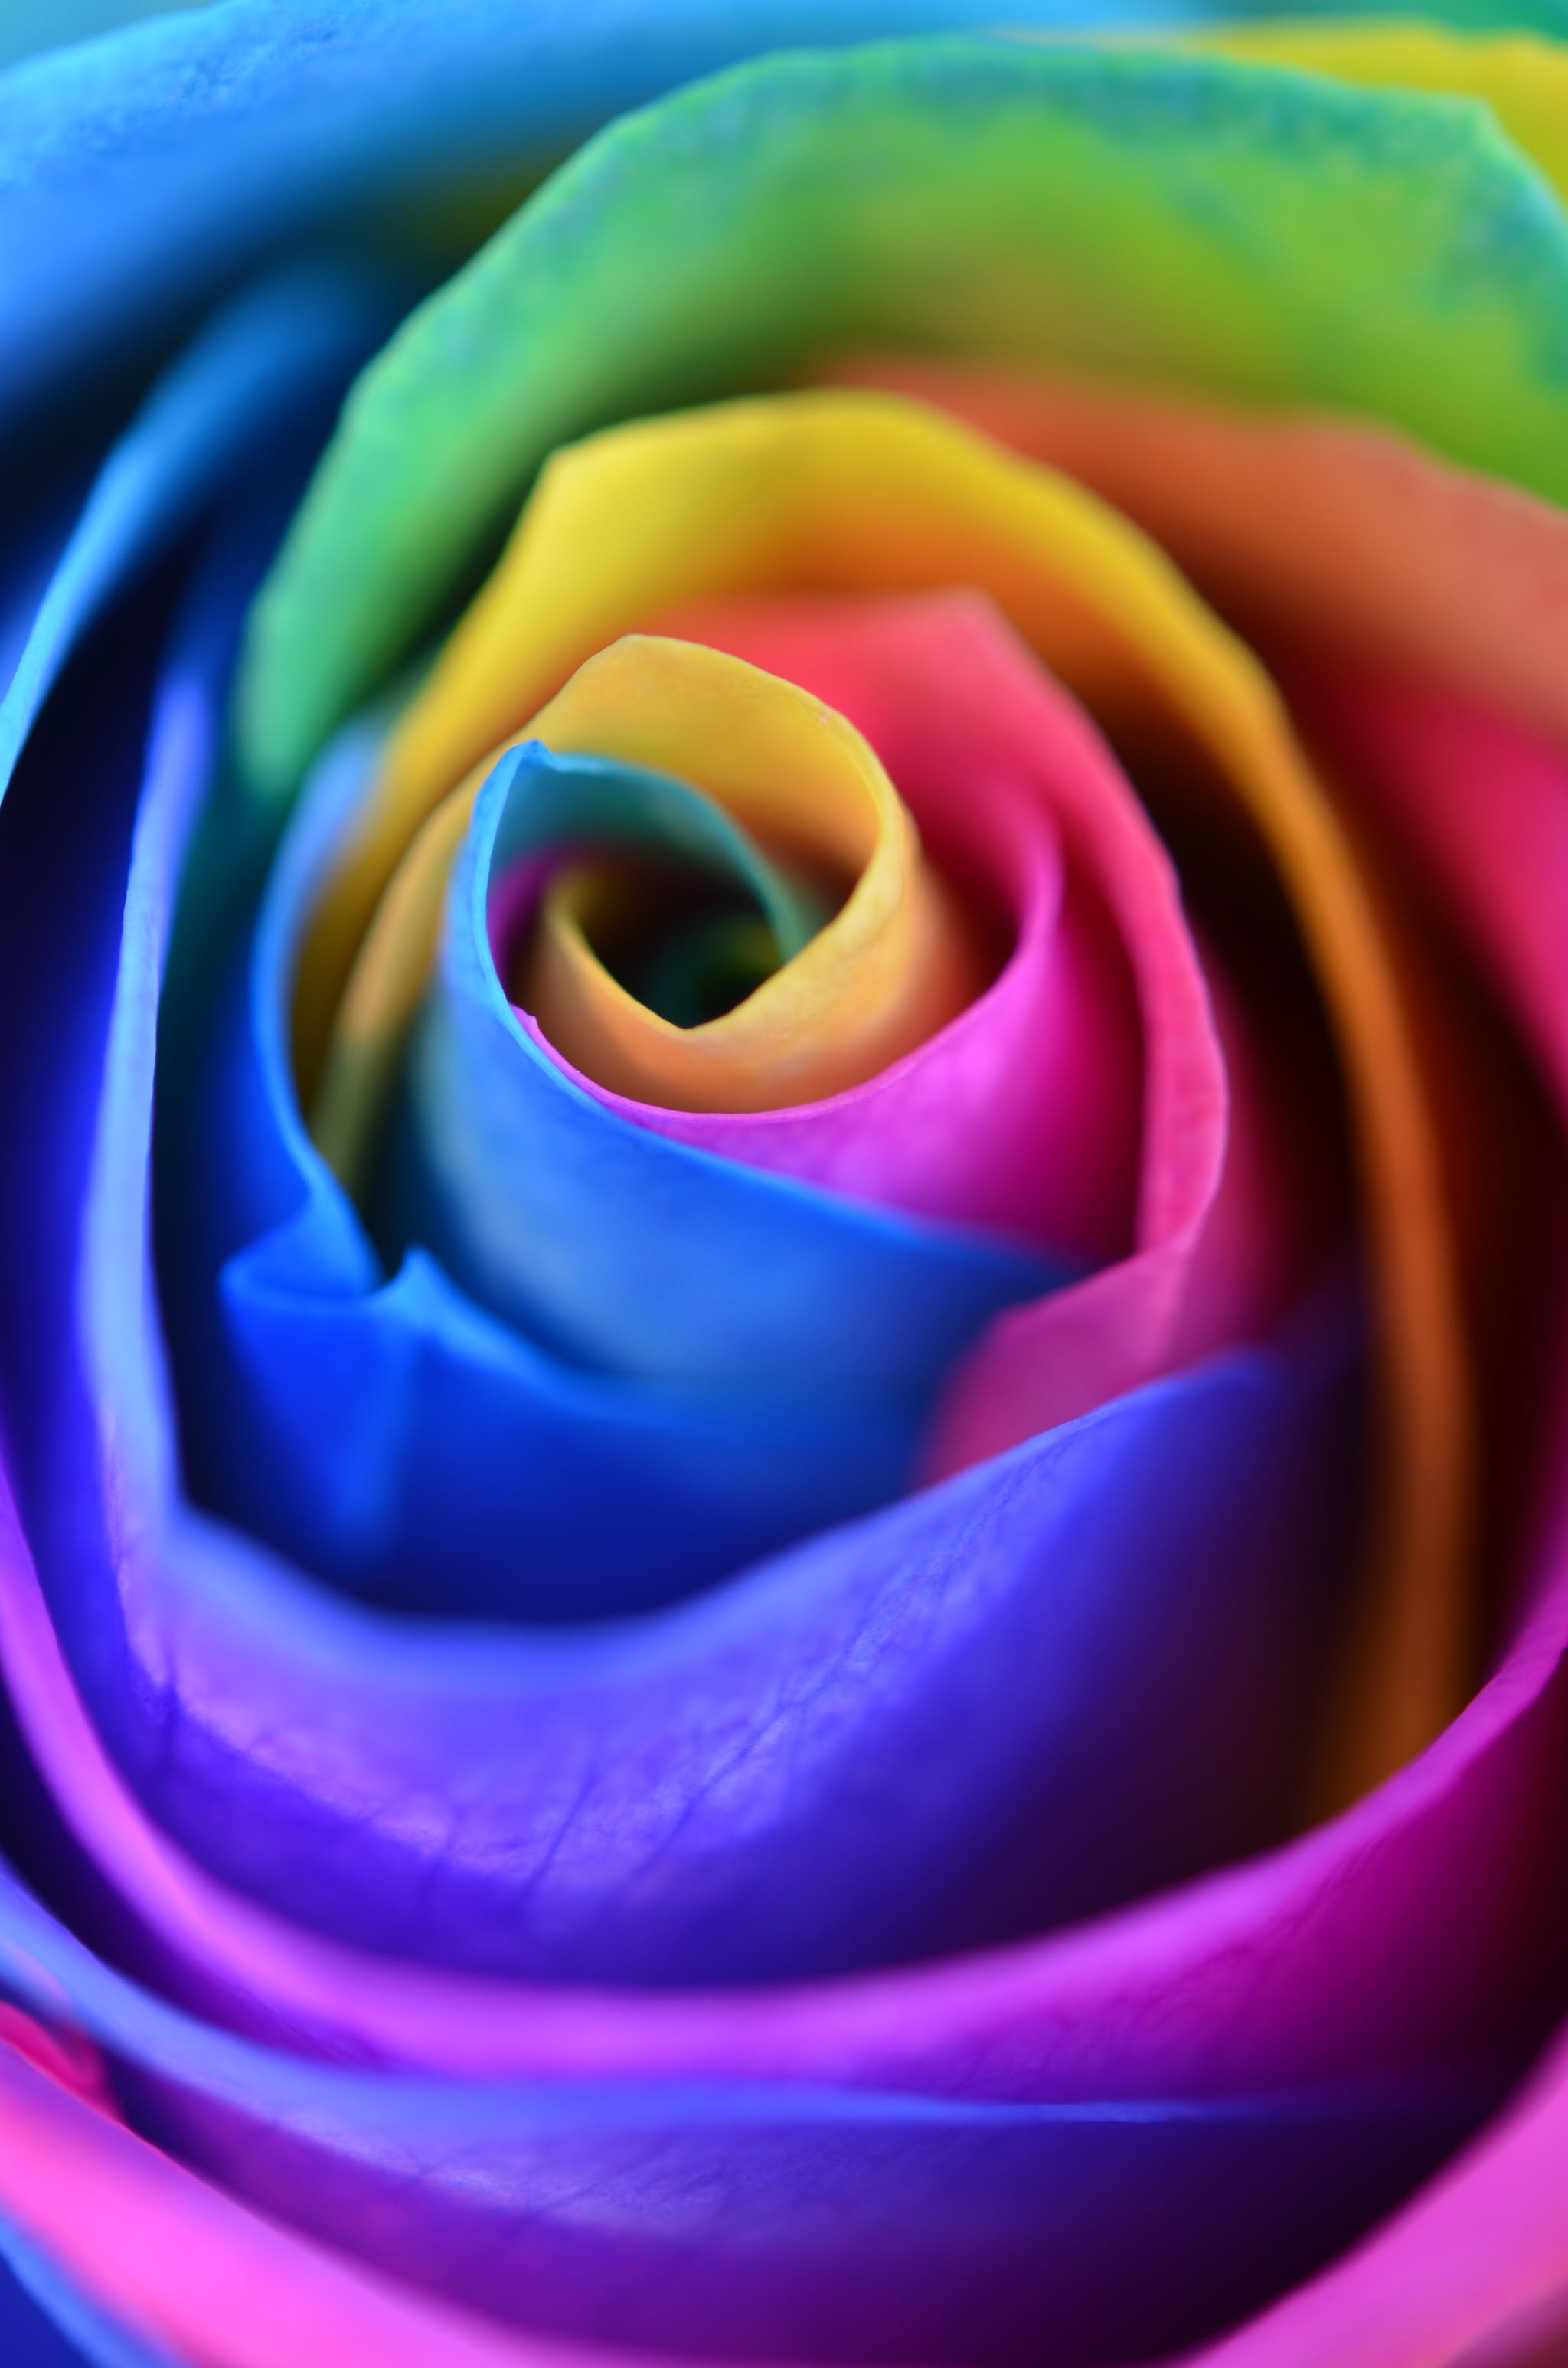 A rose with rainbow colors - Rainbows